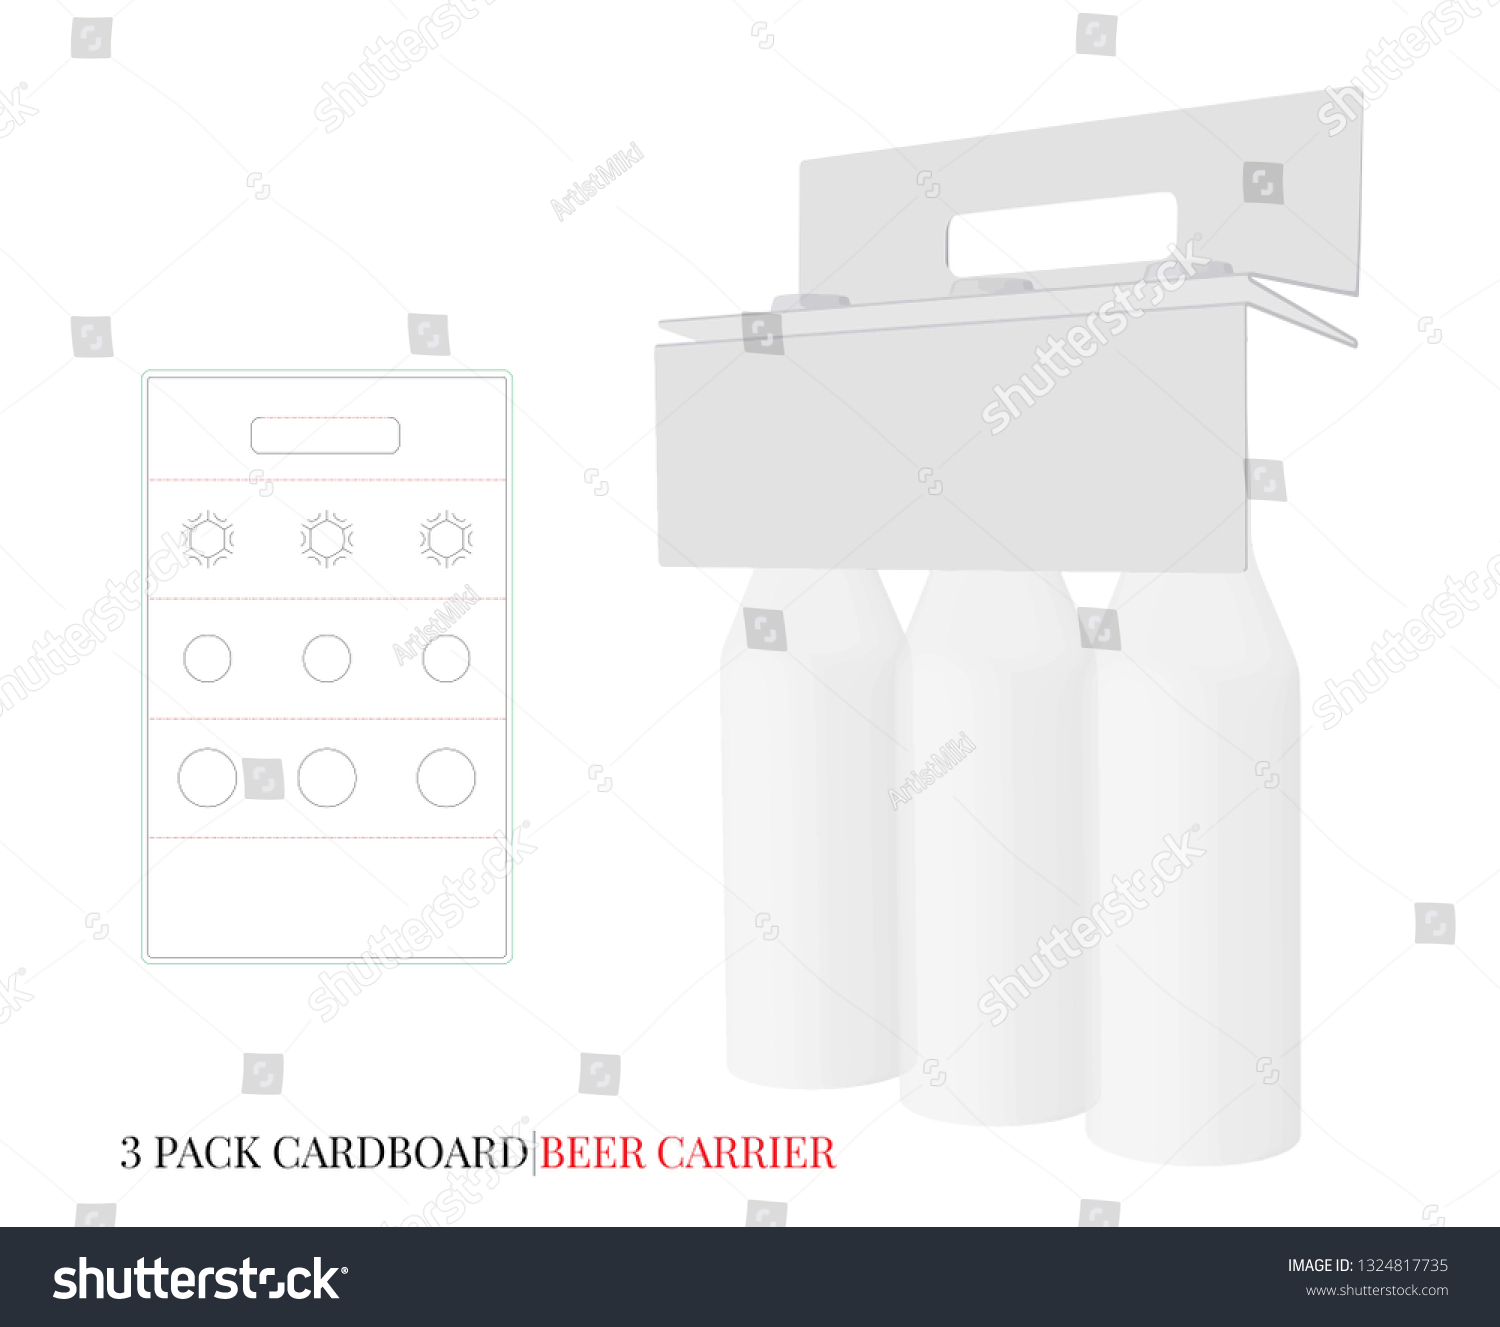 SVG of Beer Carrier Template, Three Bottles Pack, Bottles Carrier. Vector with die cut  laser cut layers. White, clear, blank, isolated mock up on white background with perspective view, 3D presentation svg